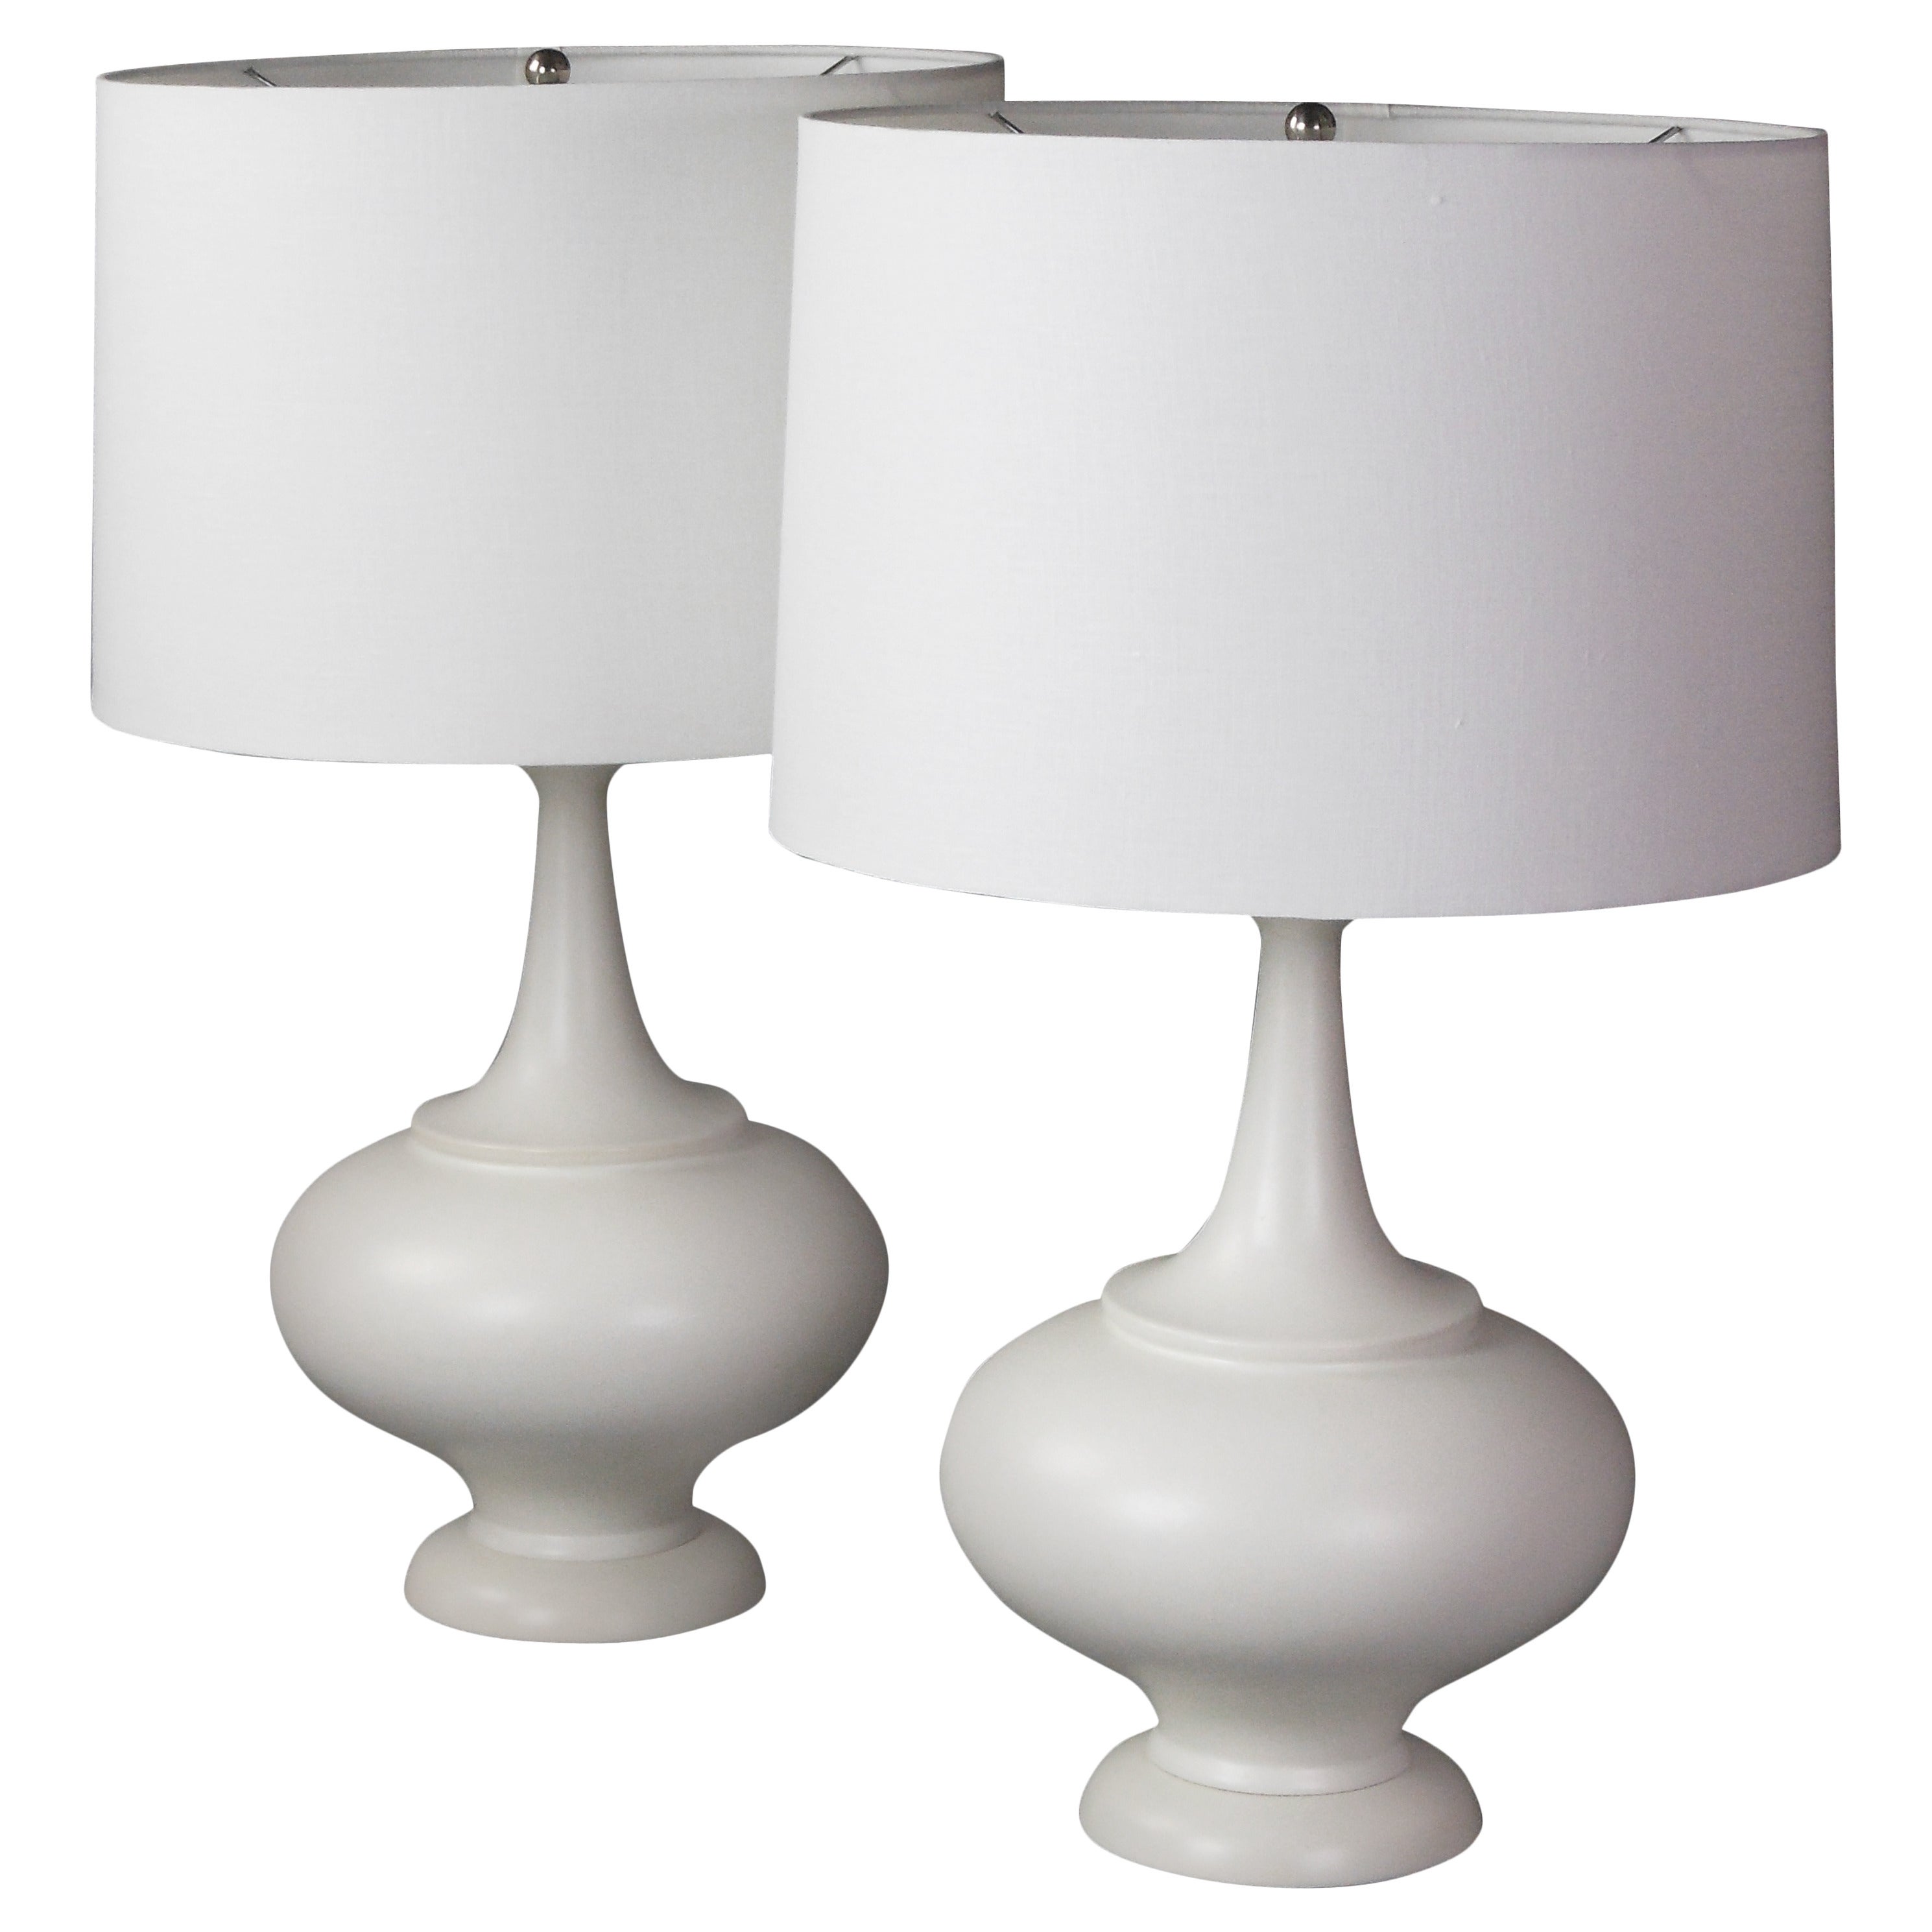 Pair of Midcentury Large White Ceramic Lamps For Sale